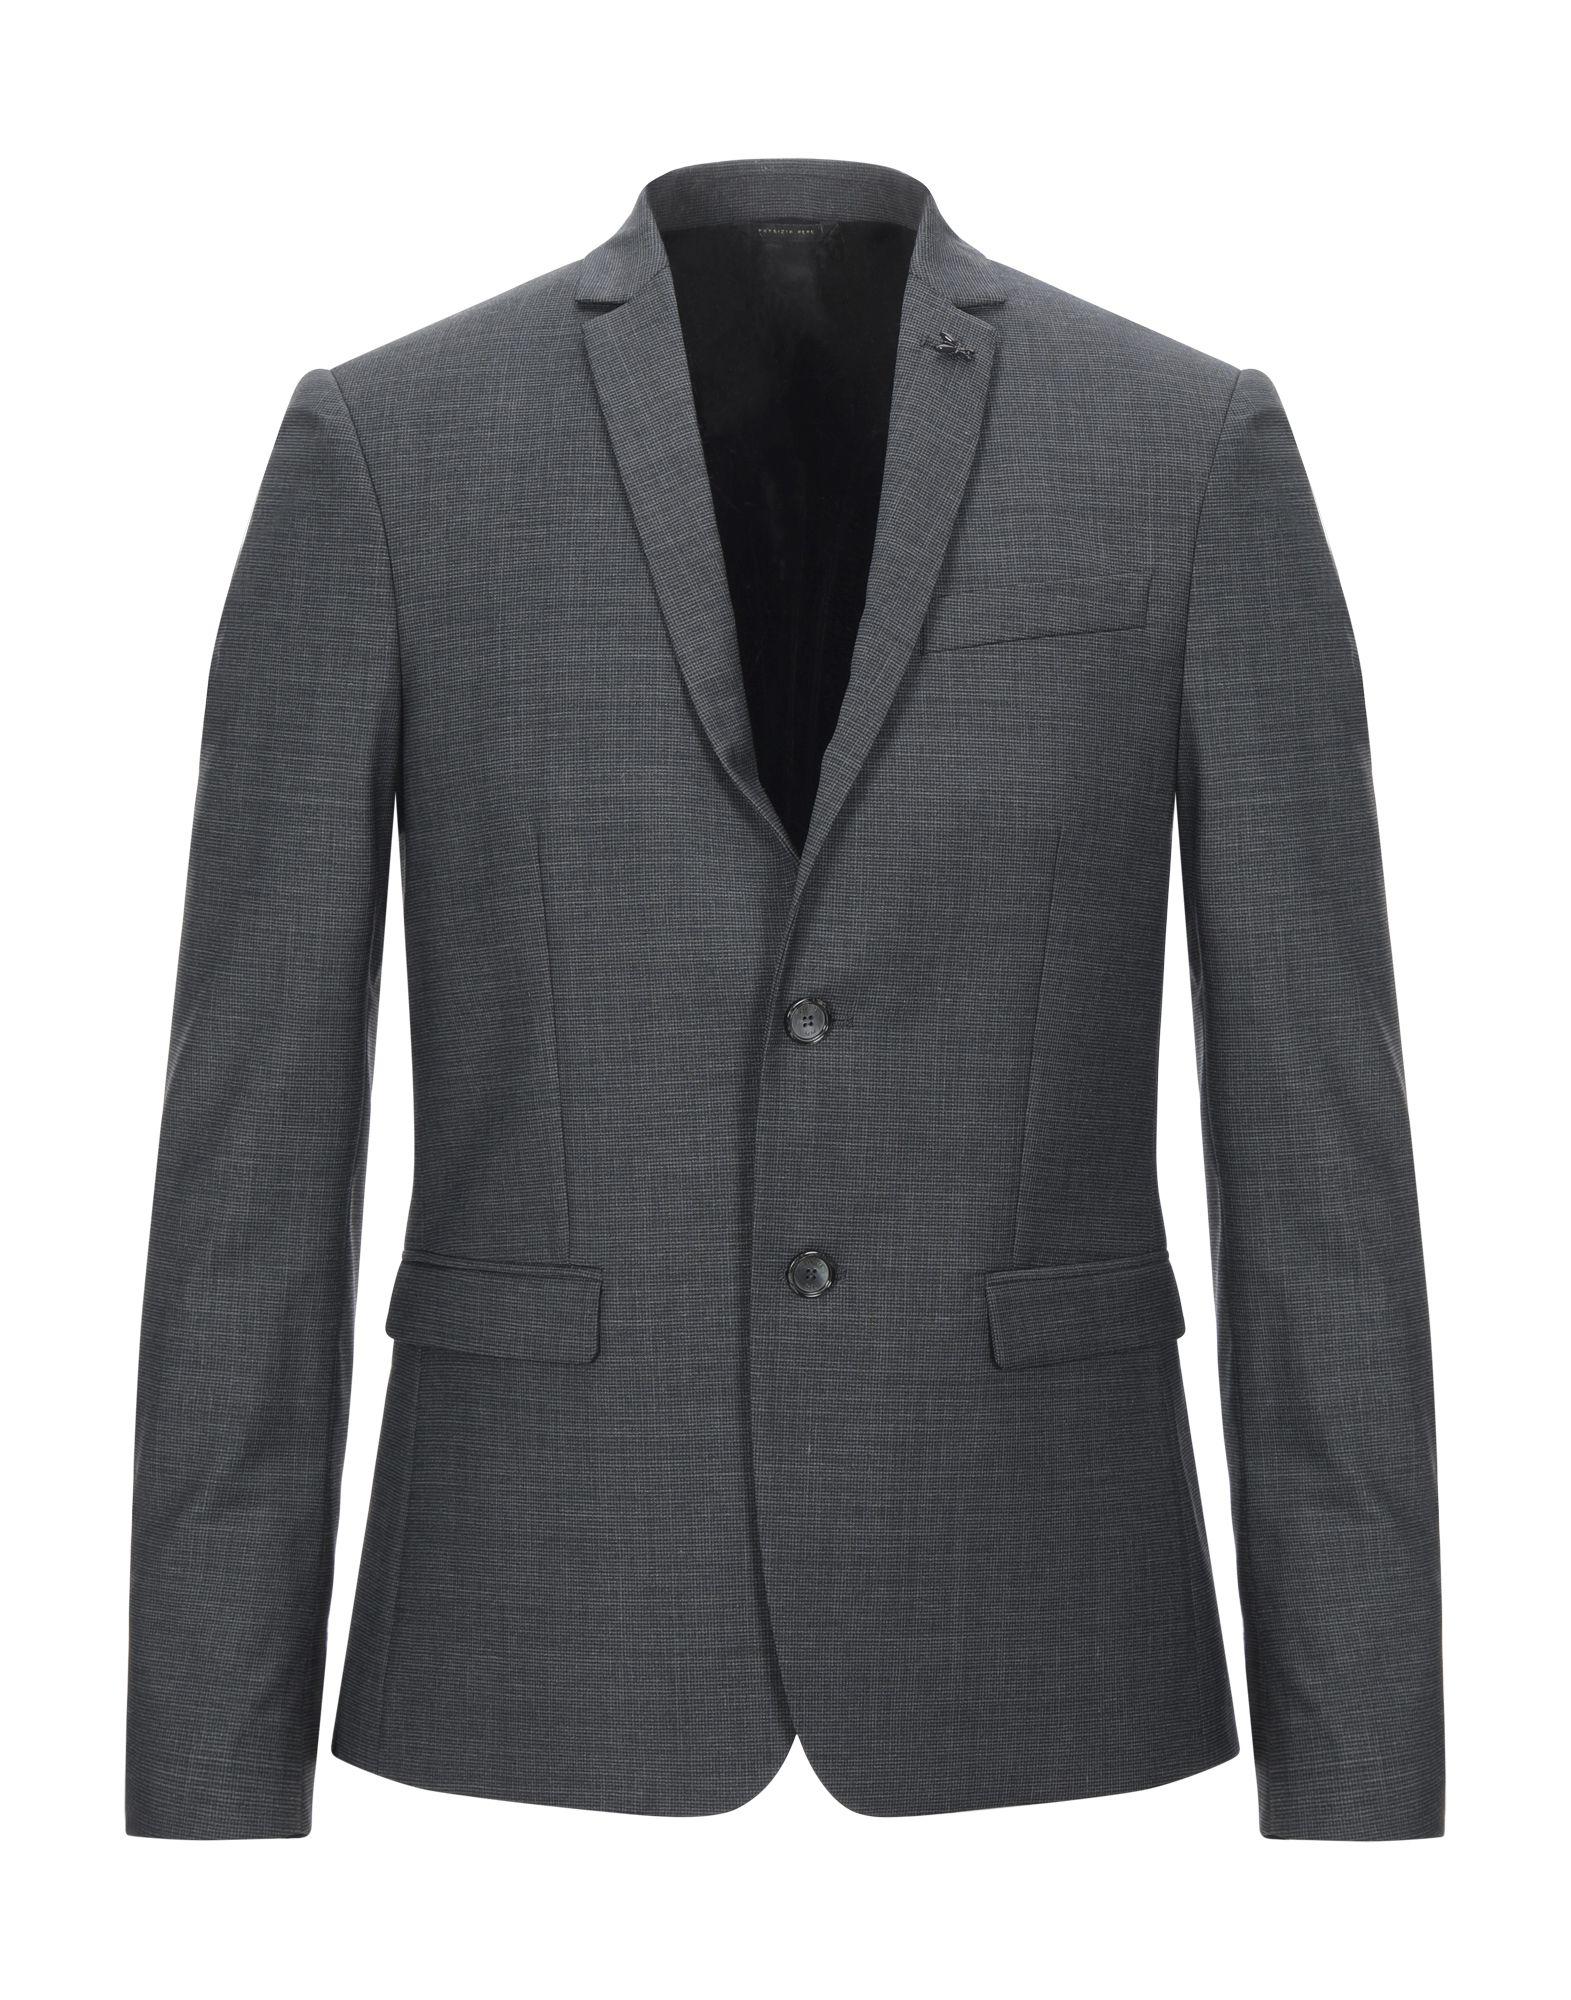 Patrizia Pepe Synthetic Suit Jacket in Steel Grey (Gray) for Men - Lyst